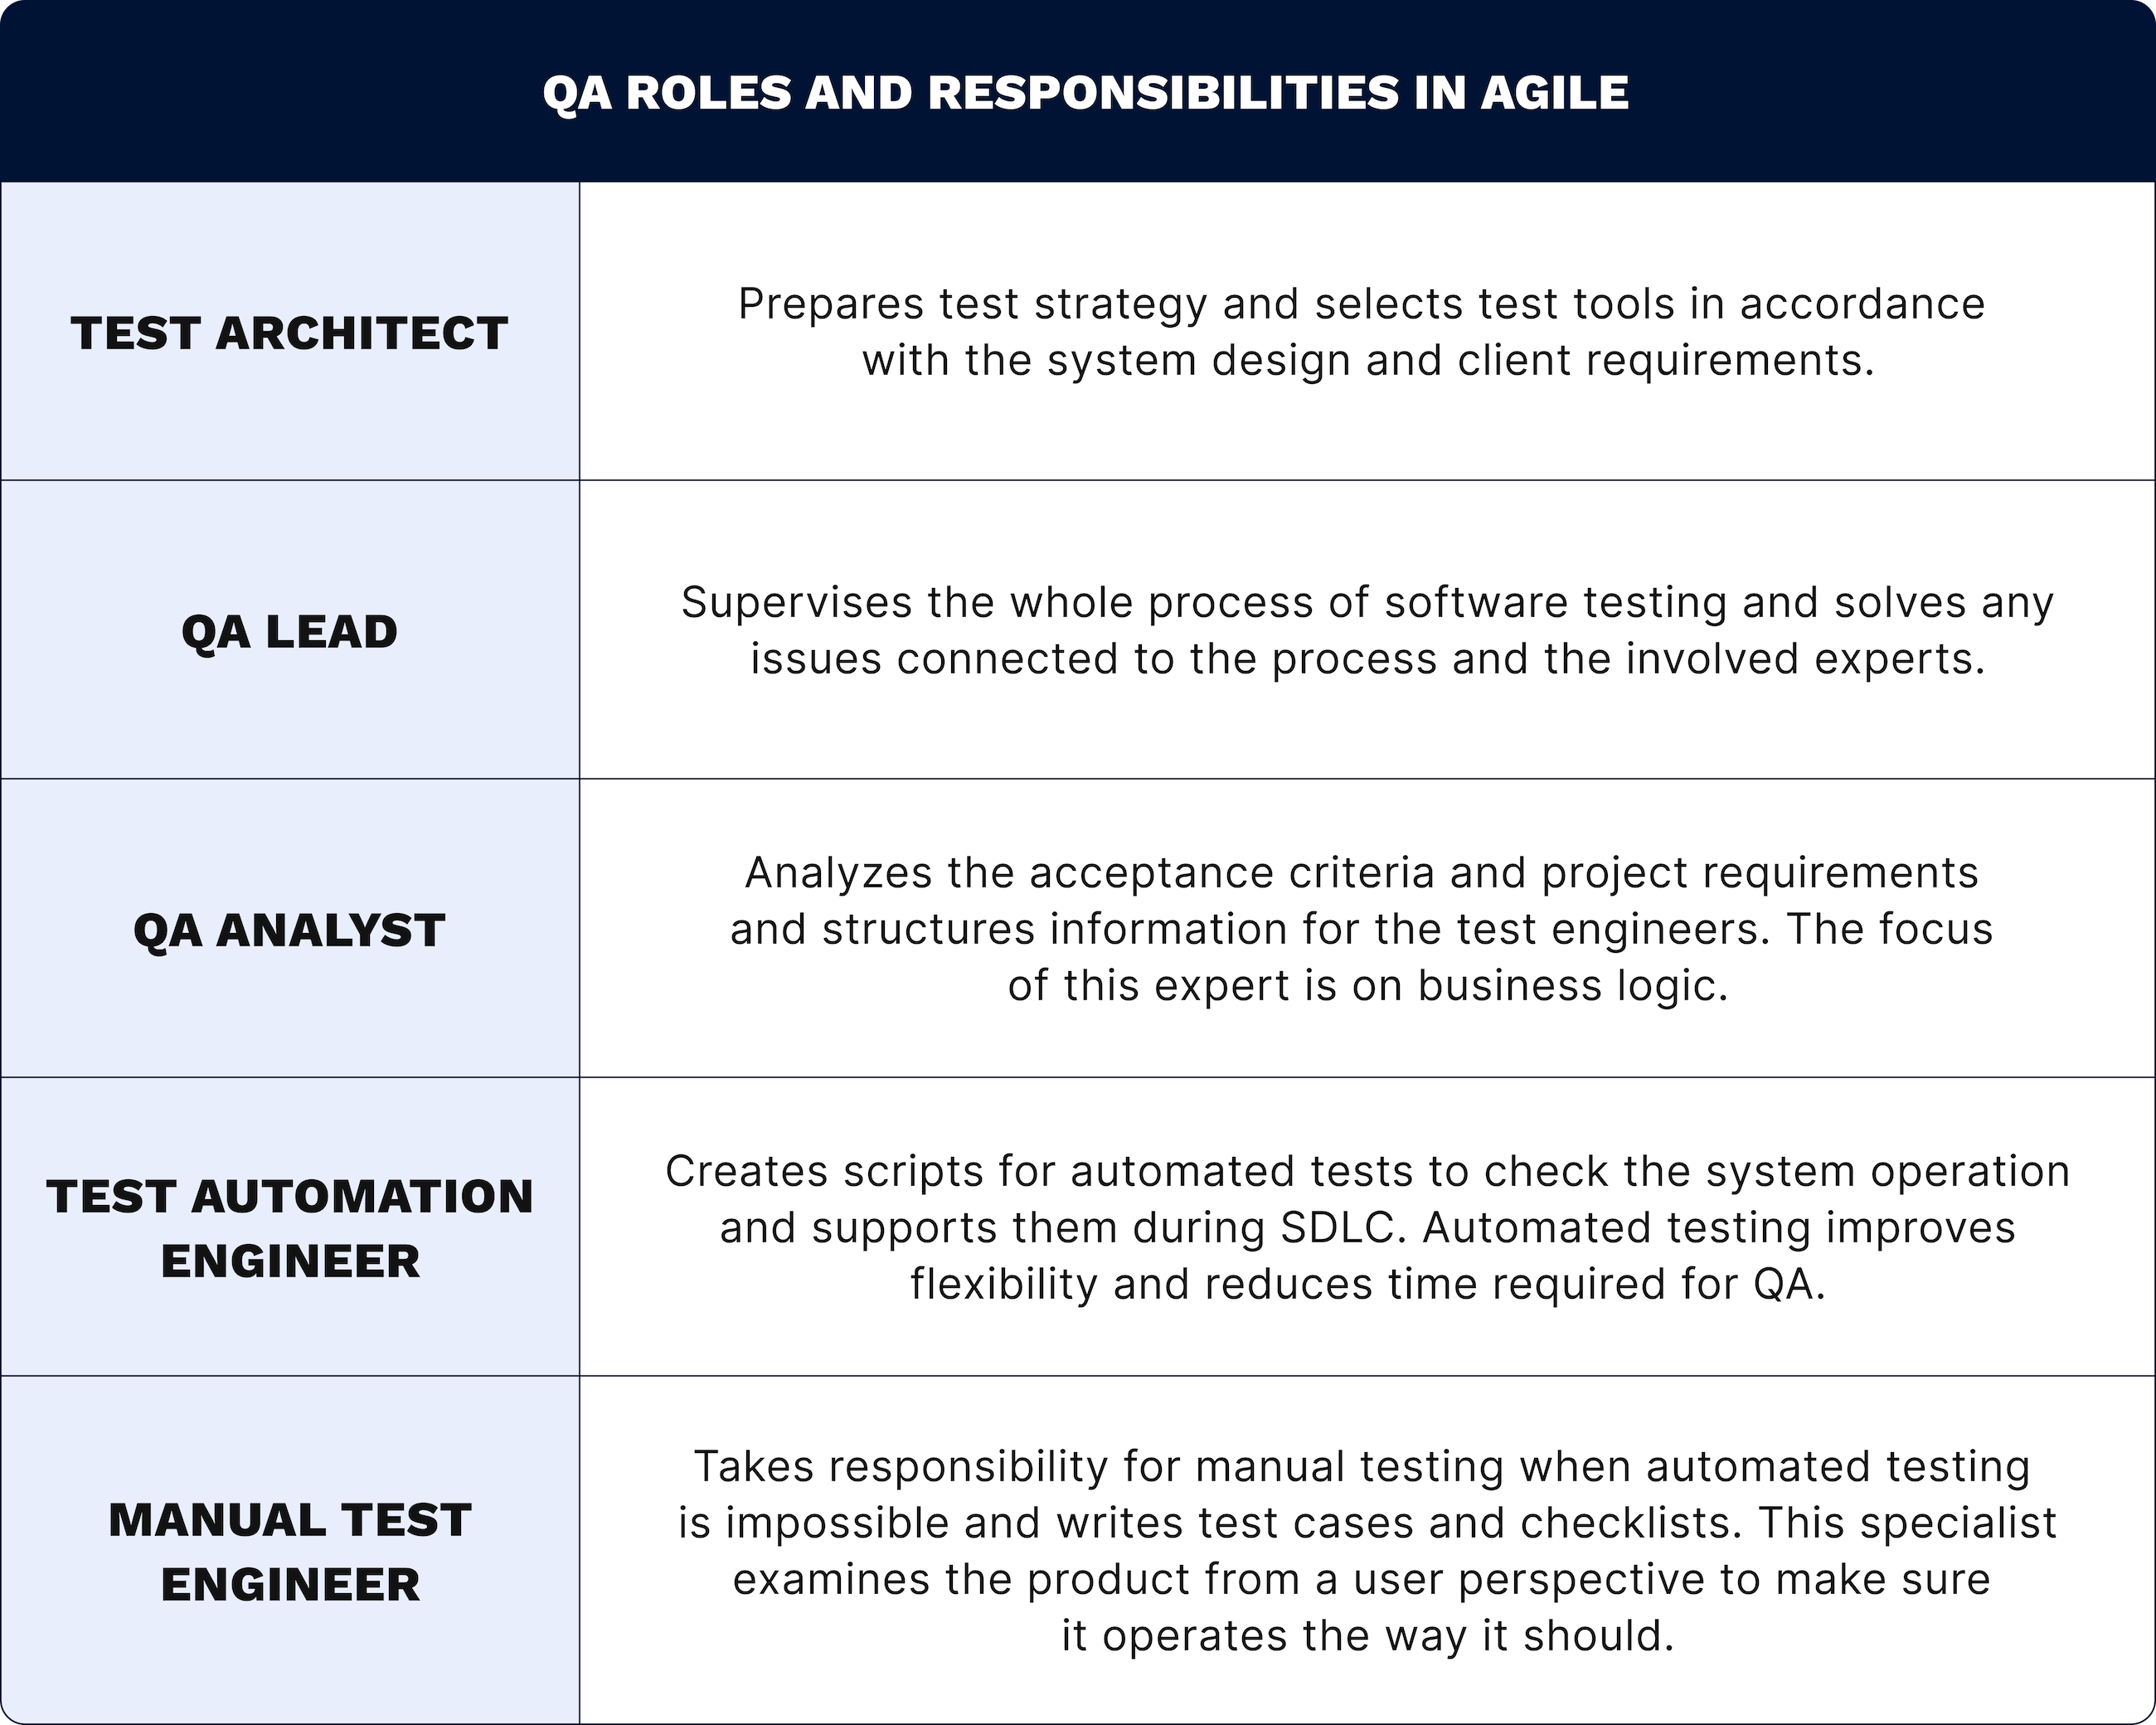 The role of a quality assurance team in Agile development